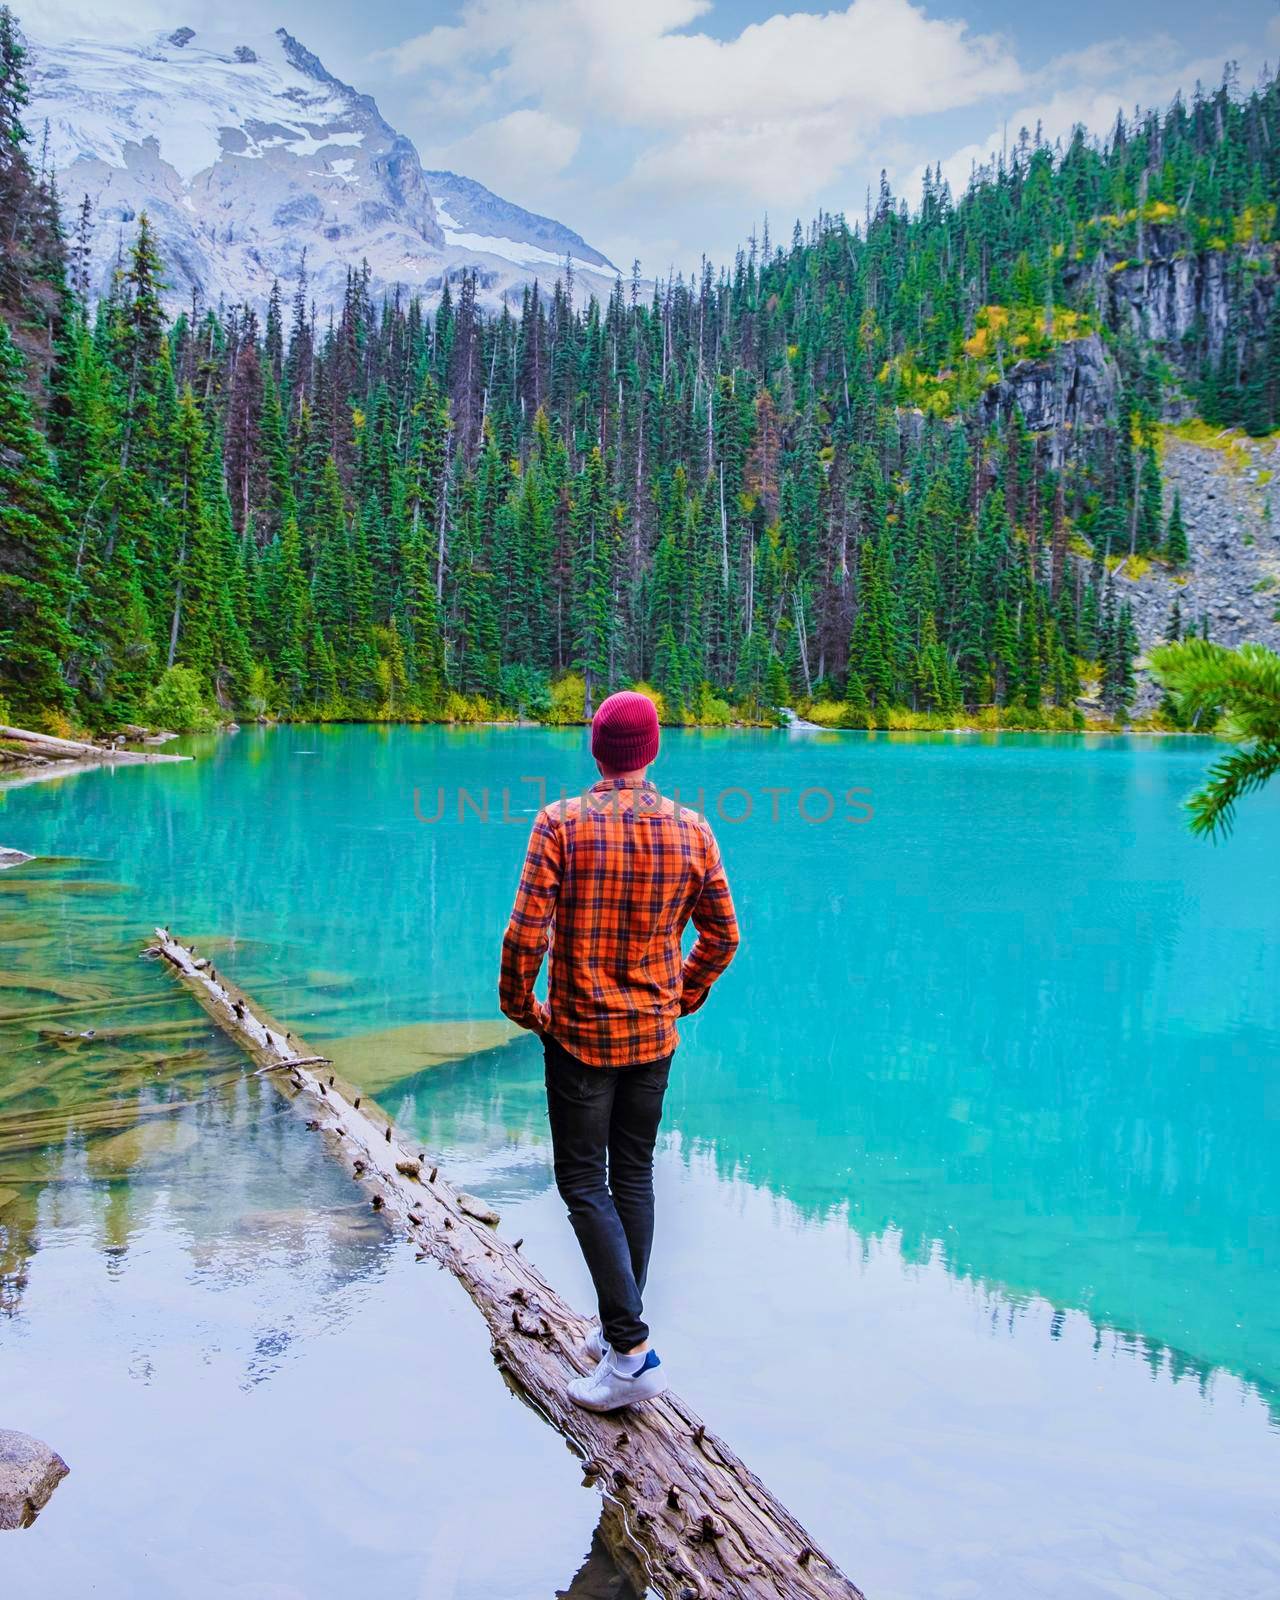 Joffre Lakes British Colombia Whistler Canada, colorful lake of Joffre lakes national park in Canada. Young men with hat visiting Joffre lake